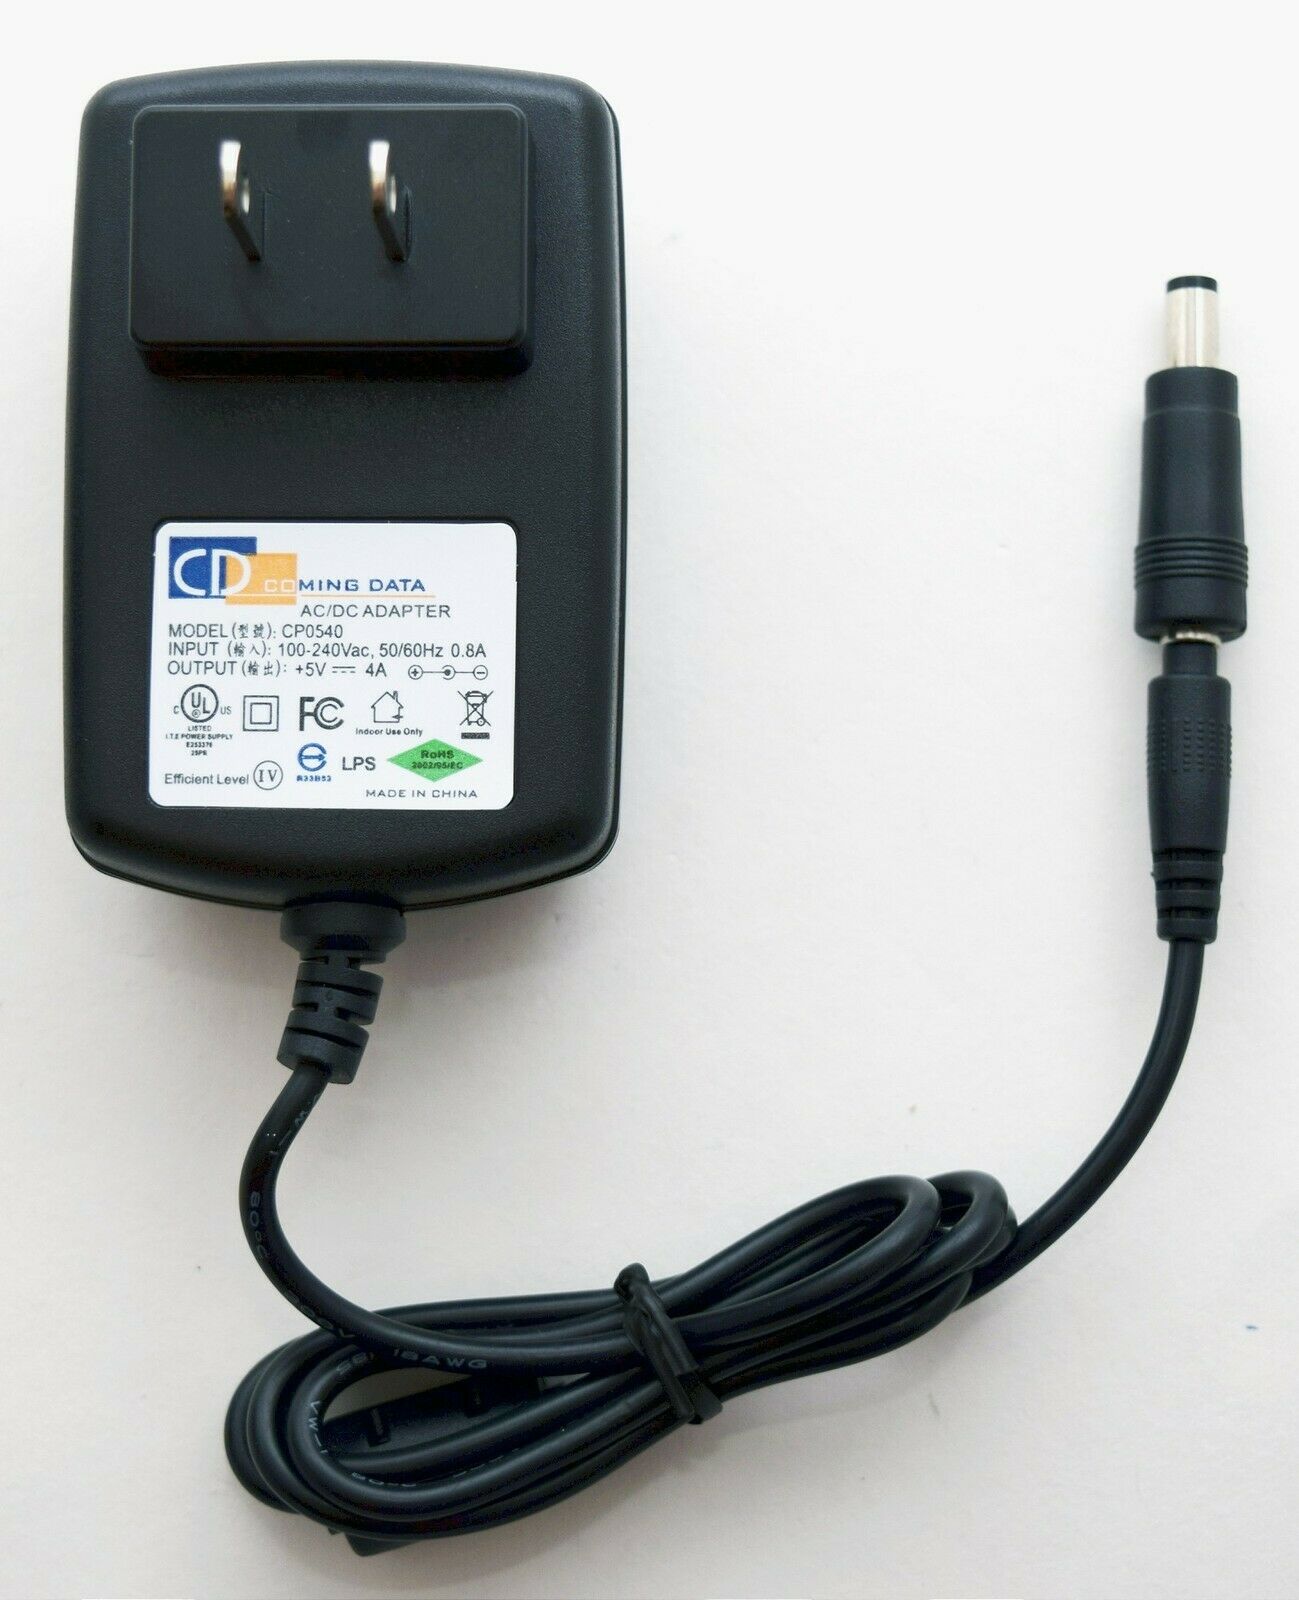 NEW COMING DATA CP0540 AC DC Power Supply 5V 4A Adapter Charger ONLY Verizon 4G Novatel T1114 Tasman